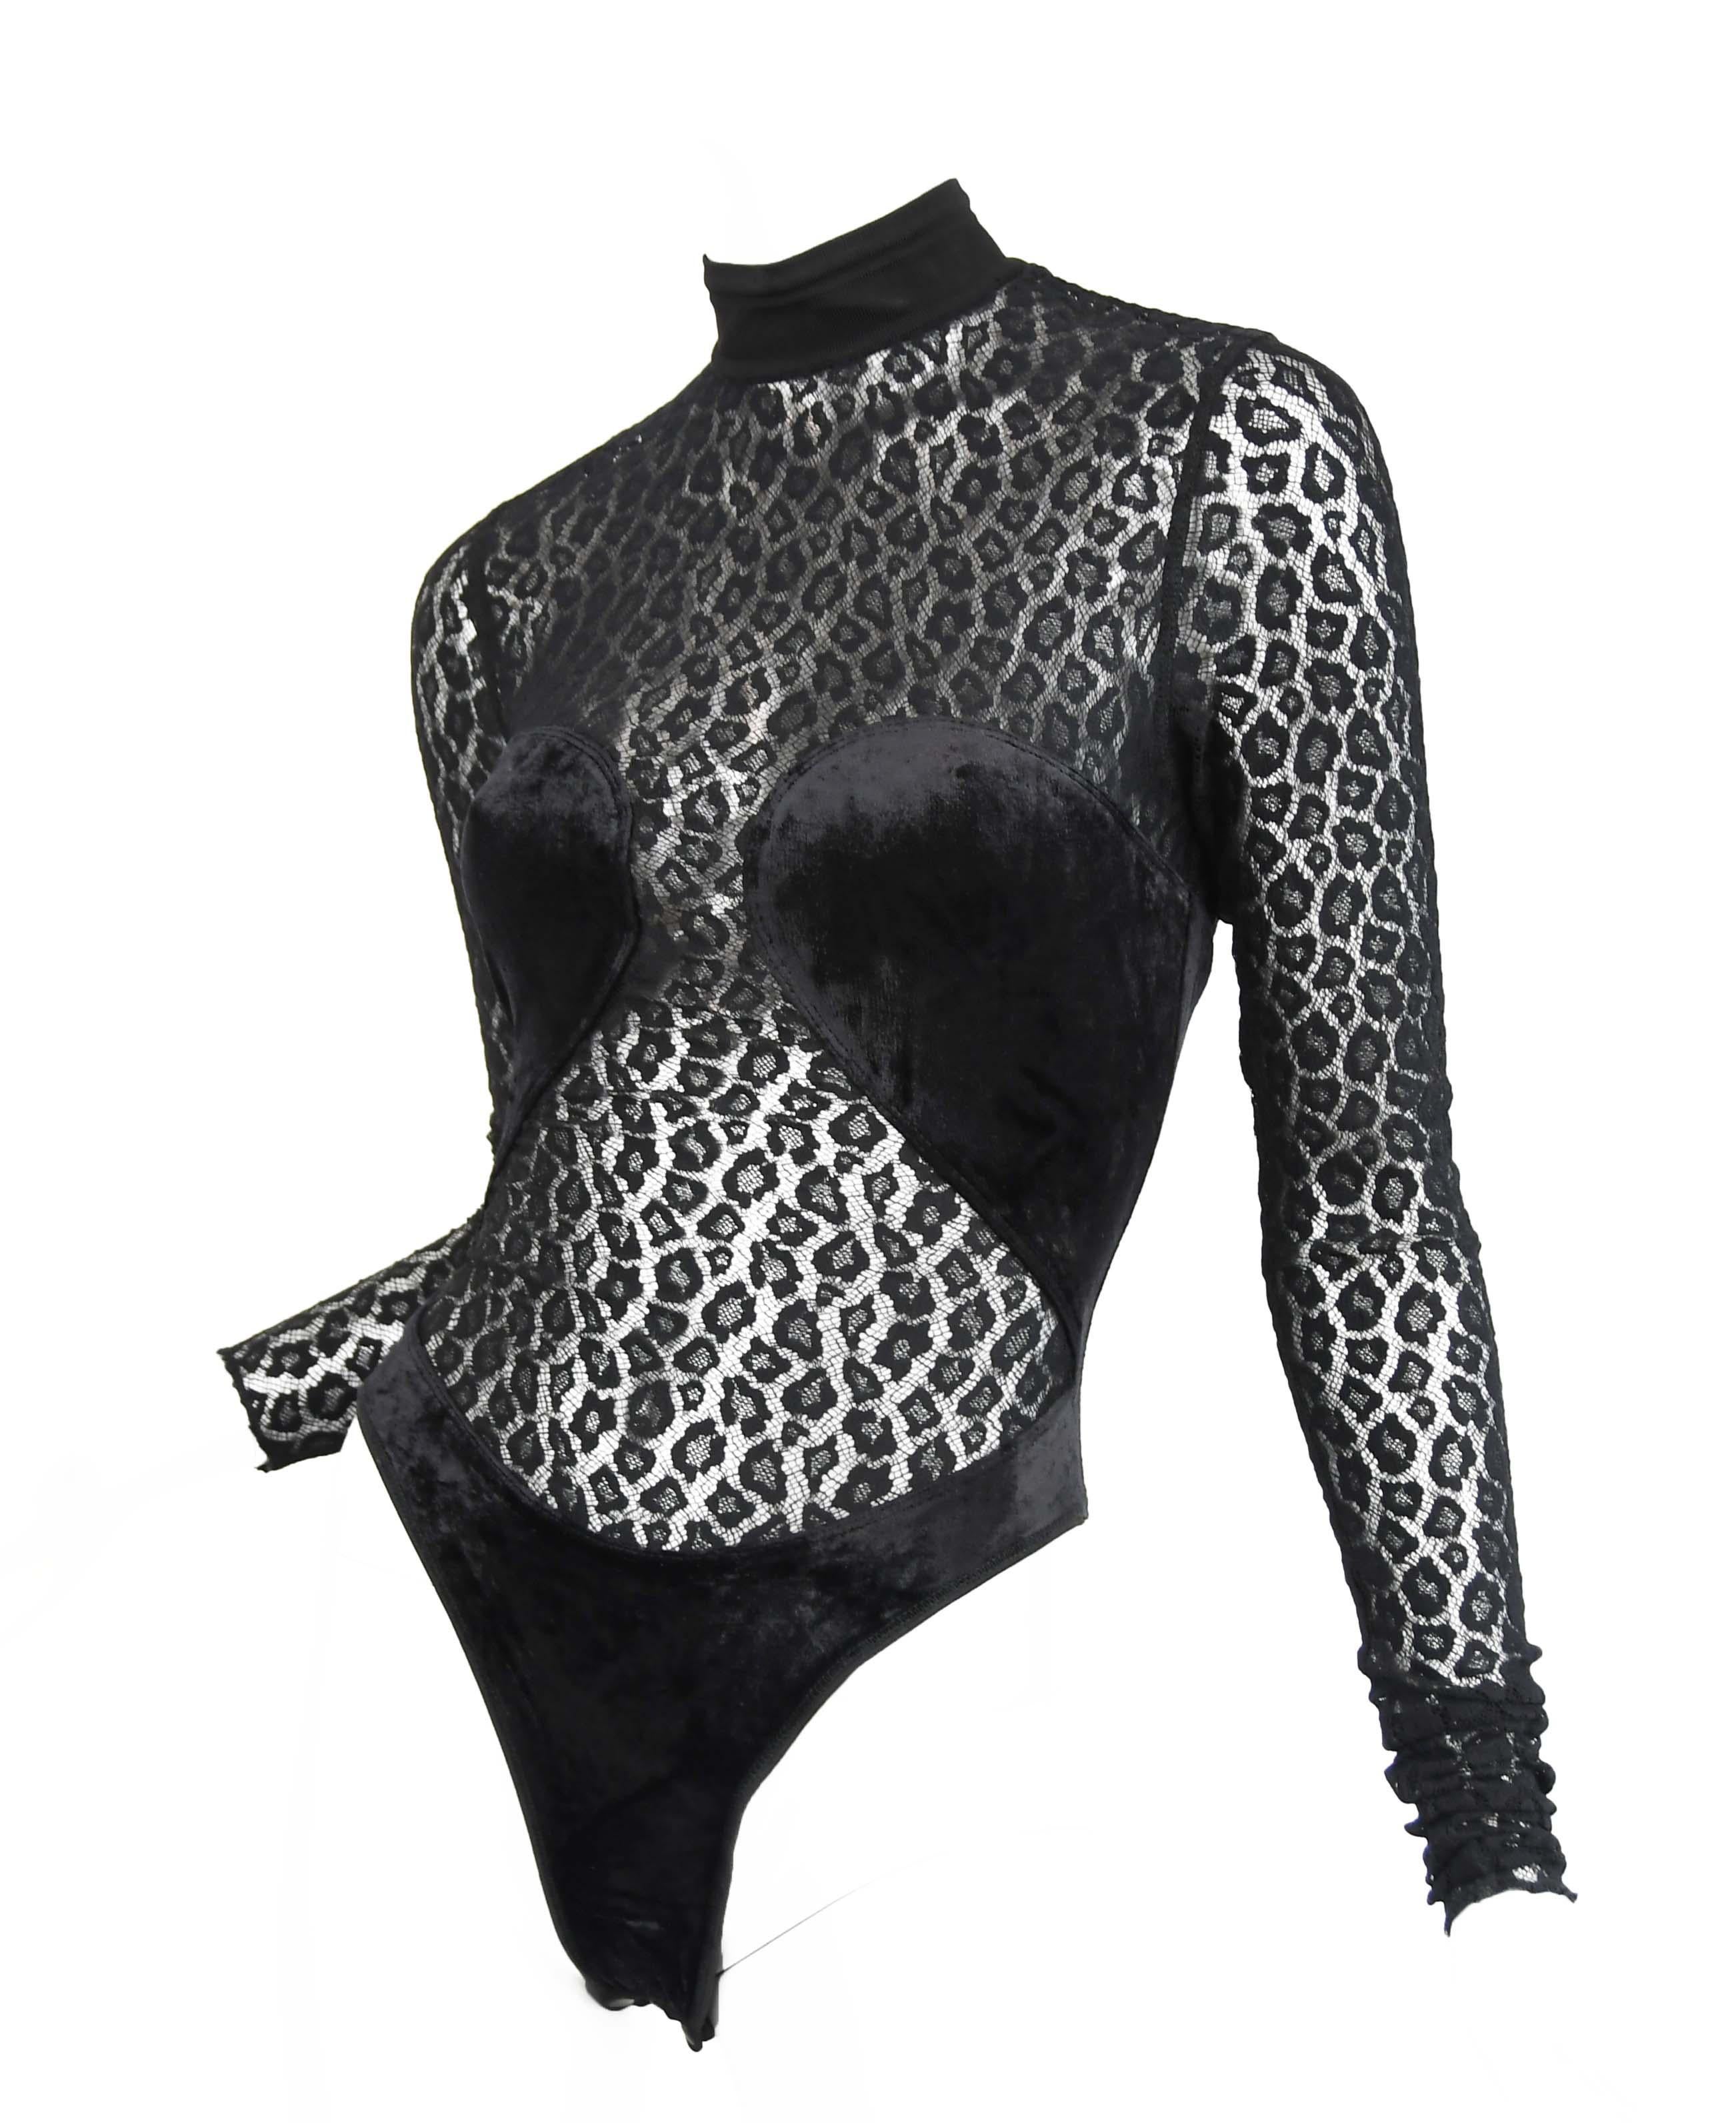 Rare vintage 1991 Alaia bodysuit, a coveted collectors item.  Do not miss out of the opportunity to own this sexy stretch leopard lace and velvet bodysuit with a high neckline.  Invisible zipper down center back.

Condition: Pristine vintage